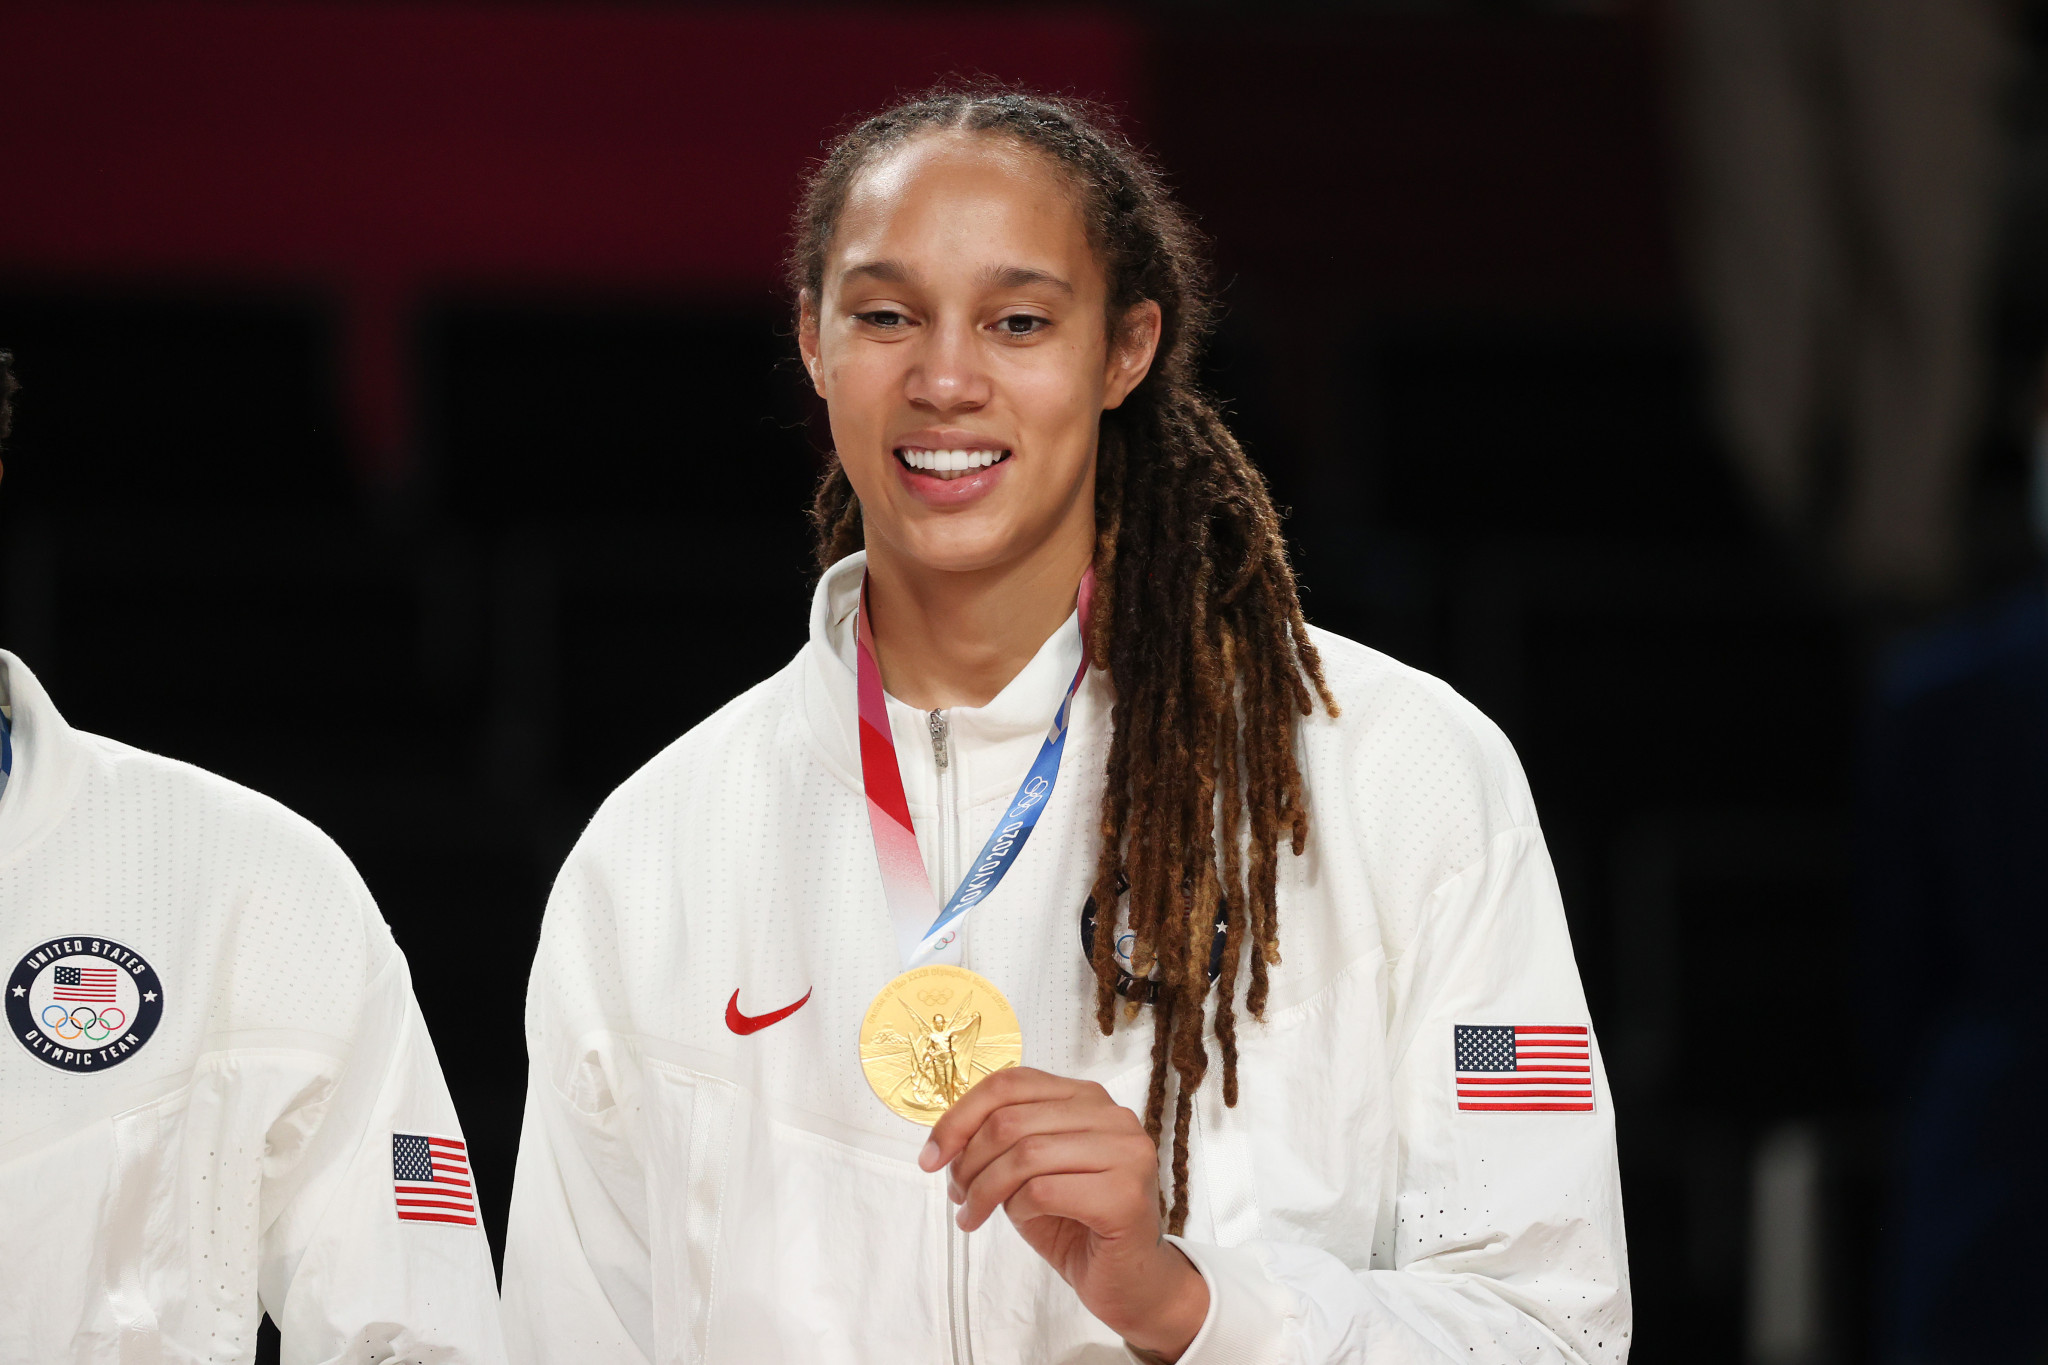 Brittney Griner shows off her gold medal after helping the United States' women's basketball team claim the title at last year's Olympics in Tokyo ©Getty Images